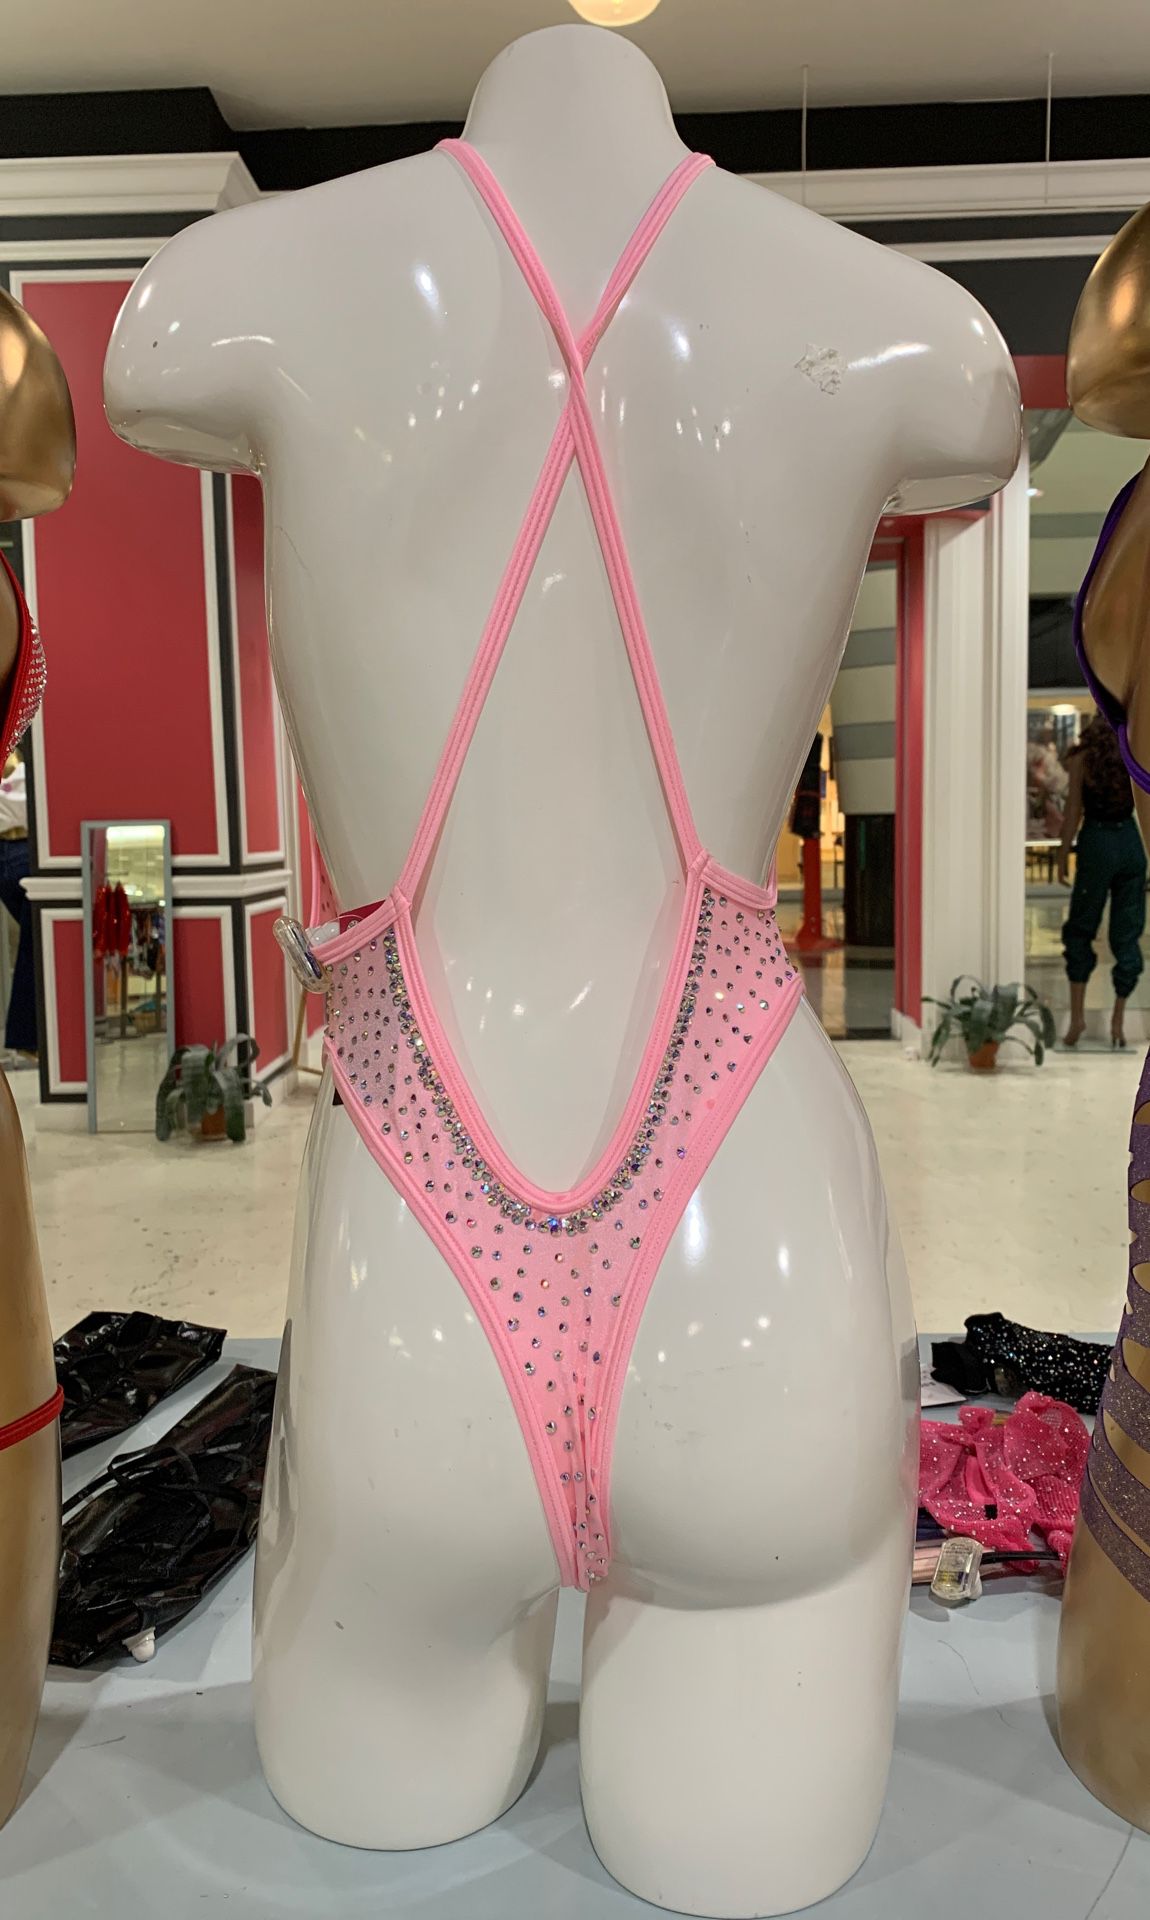 Stripper outfits for Sale in Las Vegas, NV - OfferUp